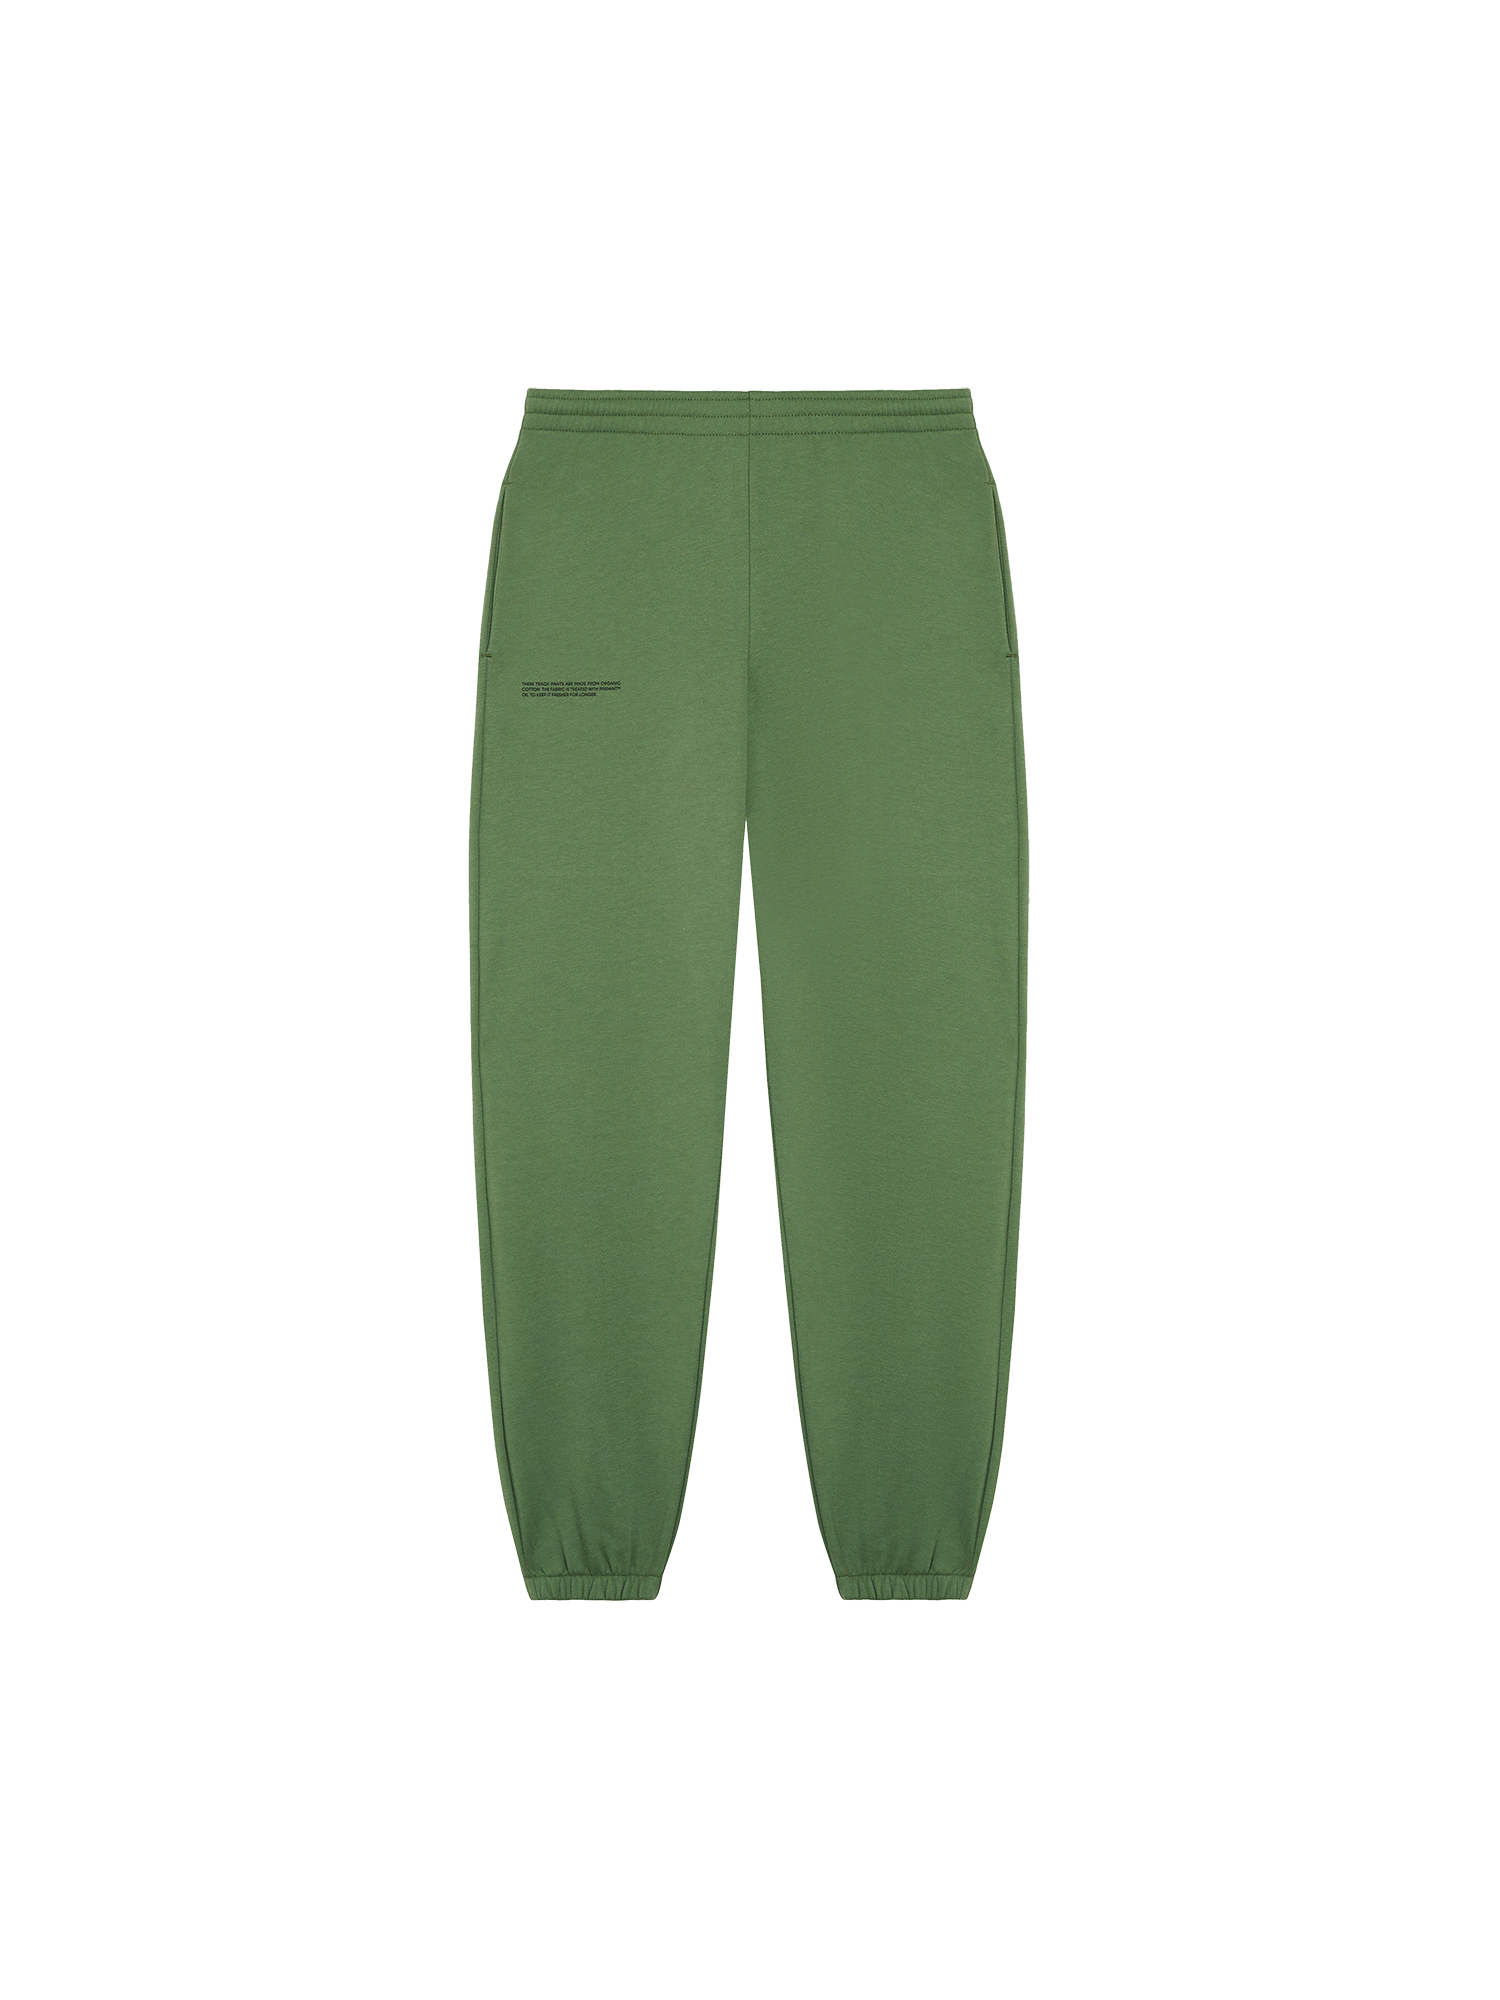 365 Midweight Track Pants—stem green